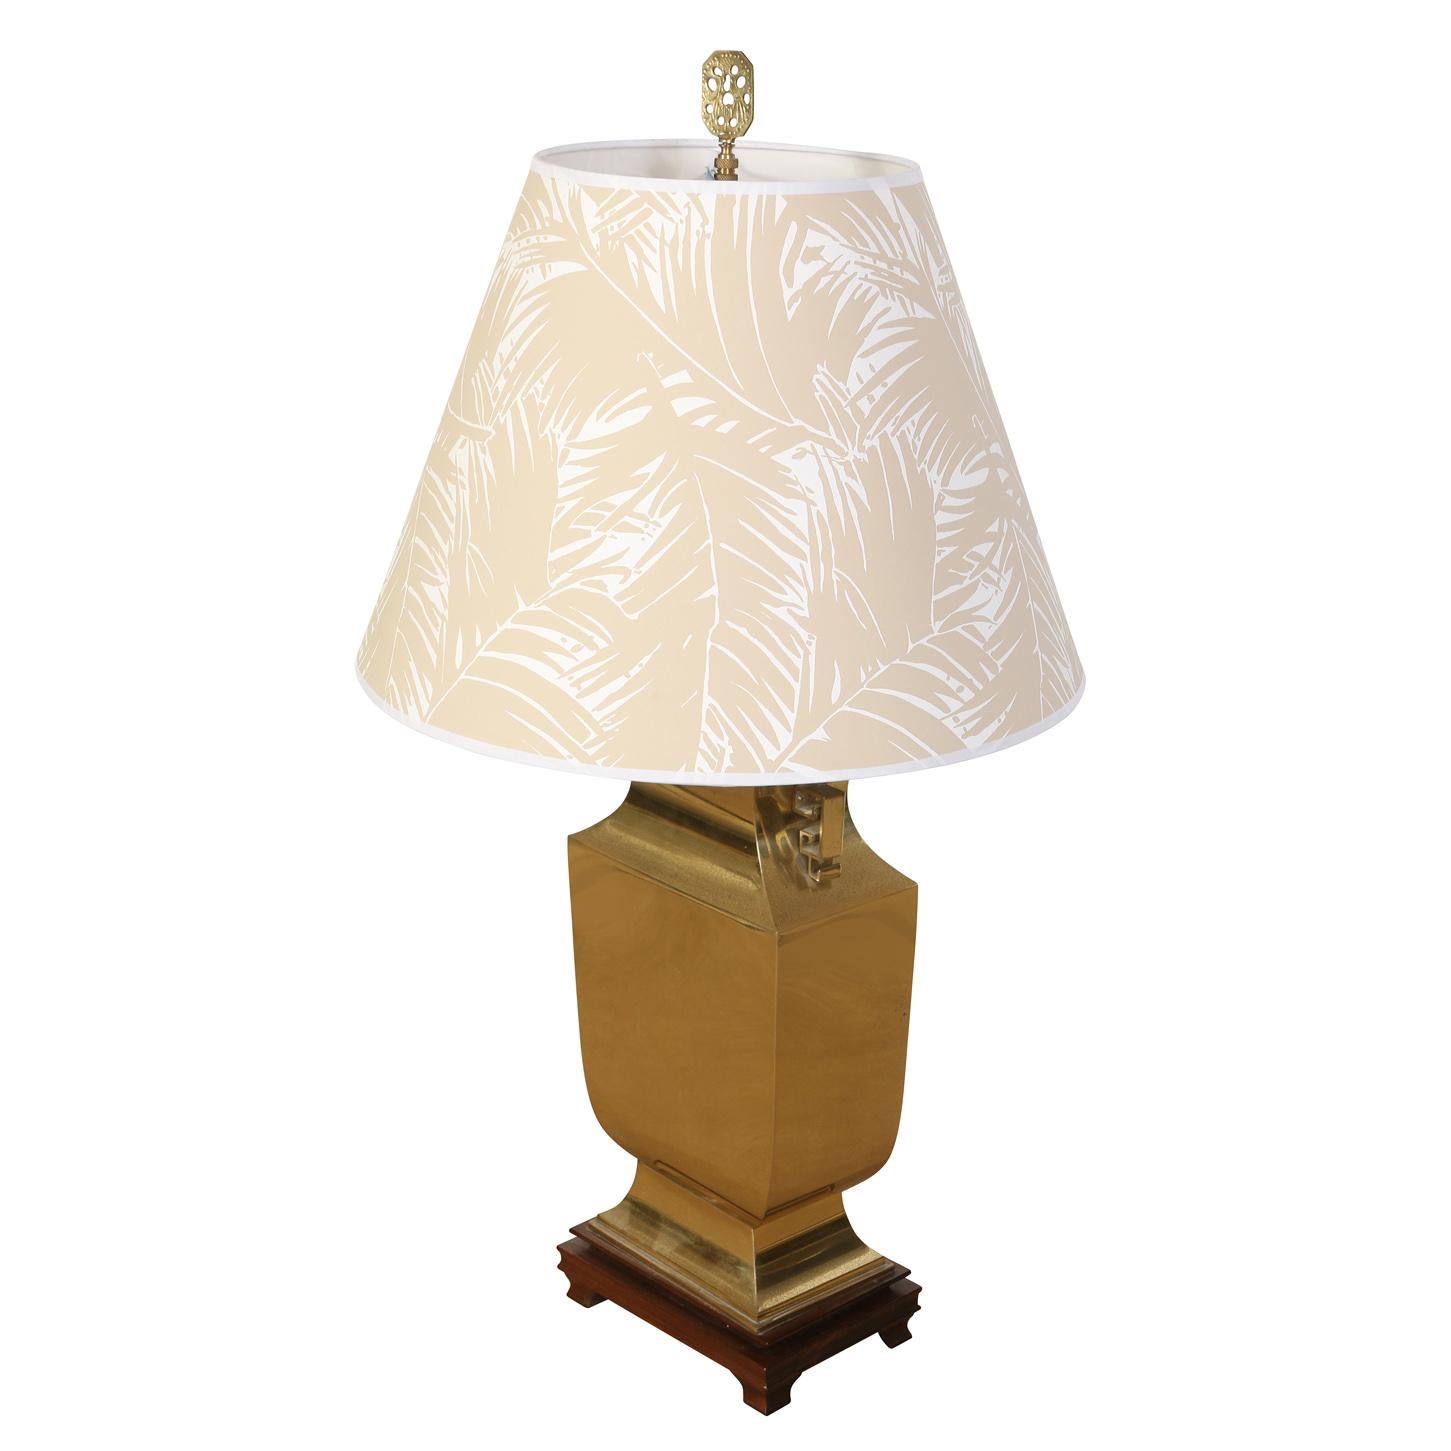 A brass urn lamp with fret chinoiserie motif handles on a wood base. The lamp's body is crafted from lustrous brass, giving it a rich, golden hue that catches the light beautifully. However, the brass has developed some pitting over time, adding